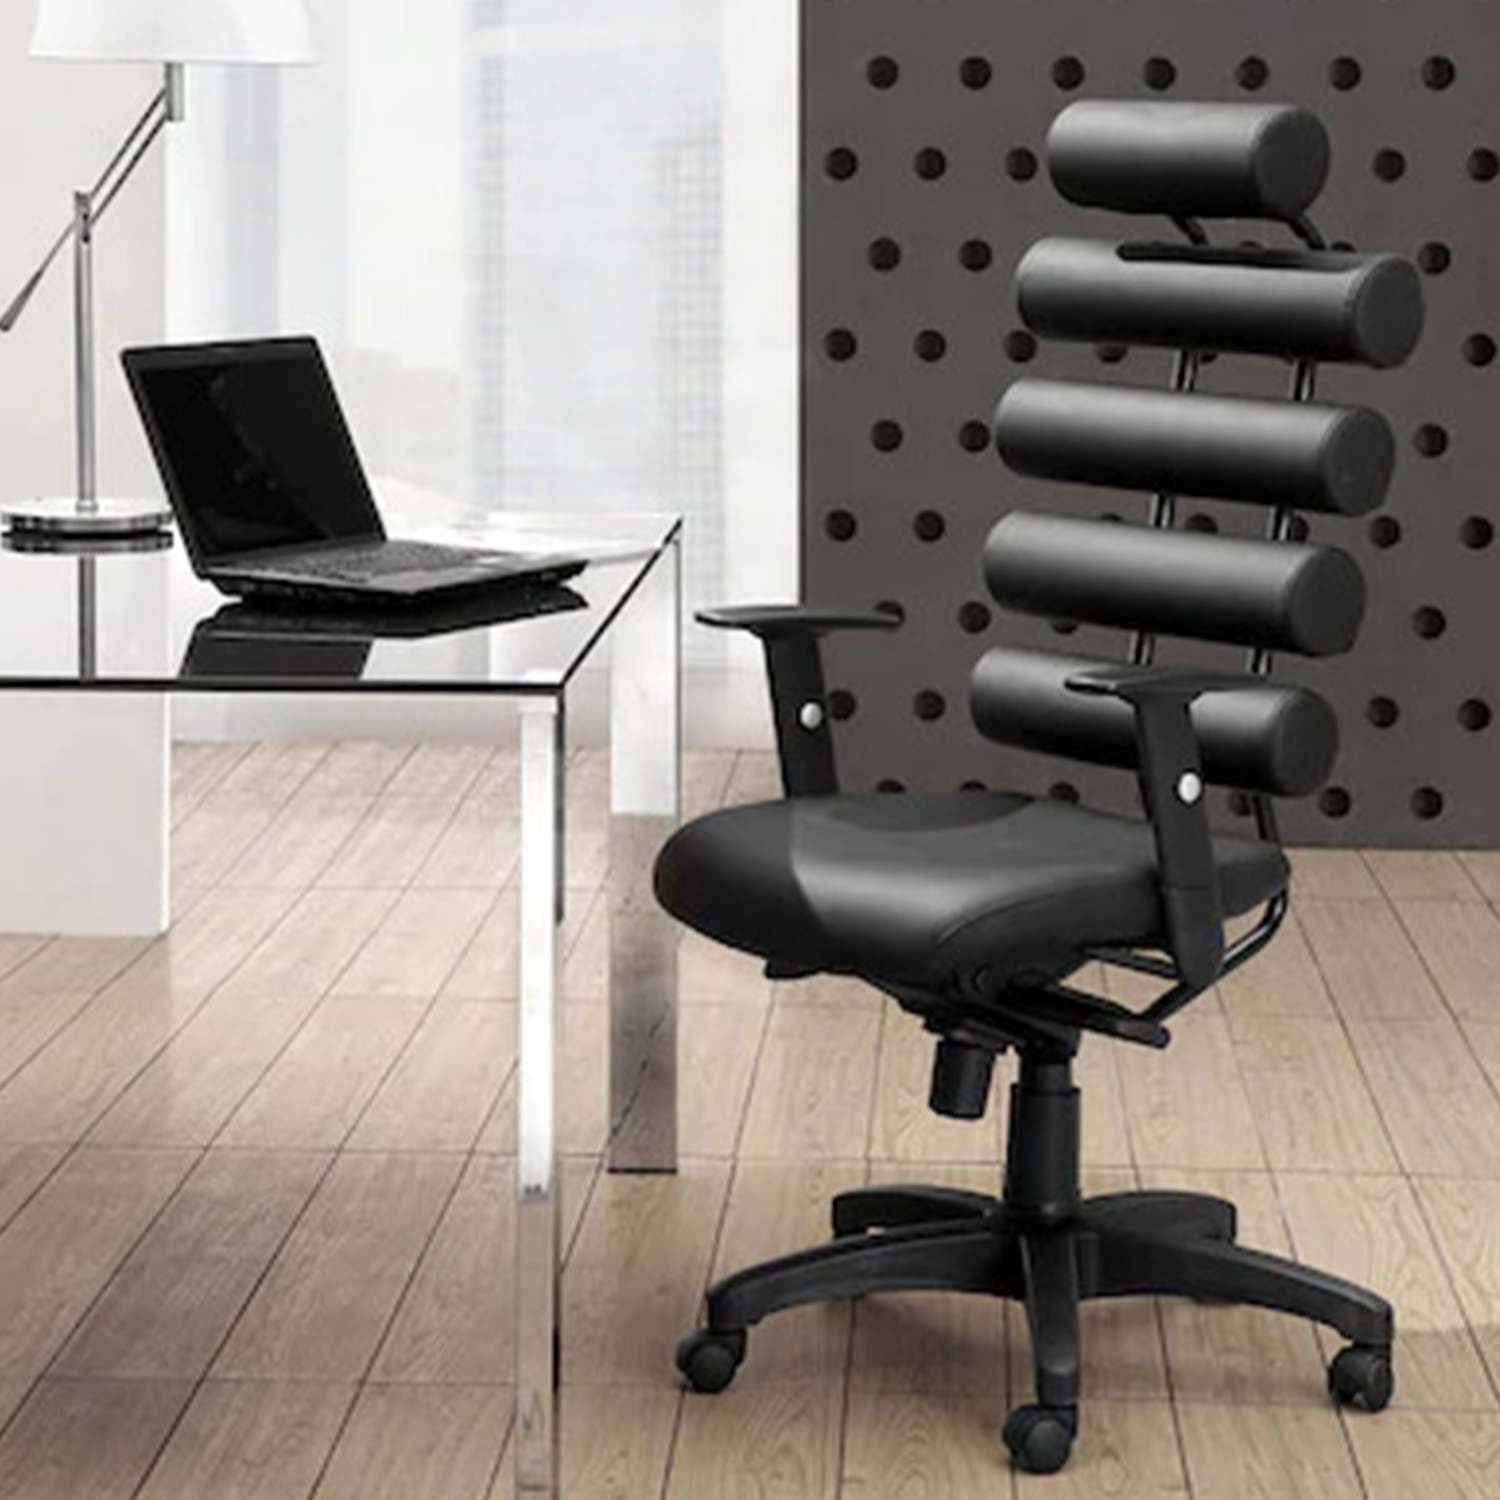 25" X 23.5" X 48.5" Black Leatherette Office Chair